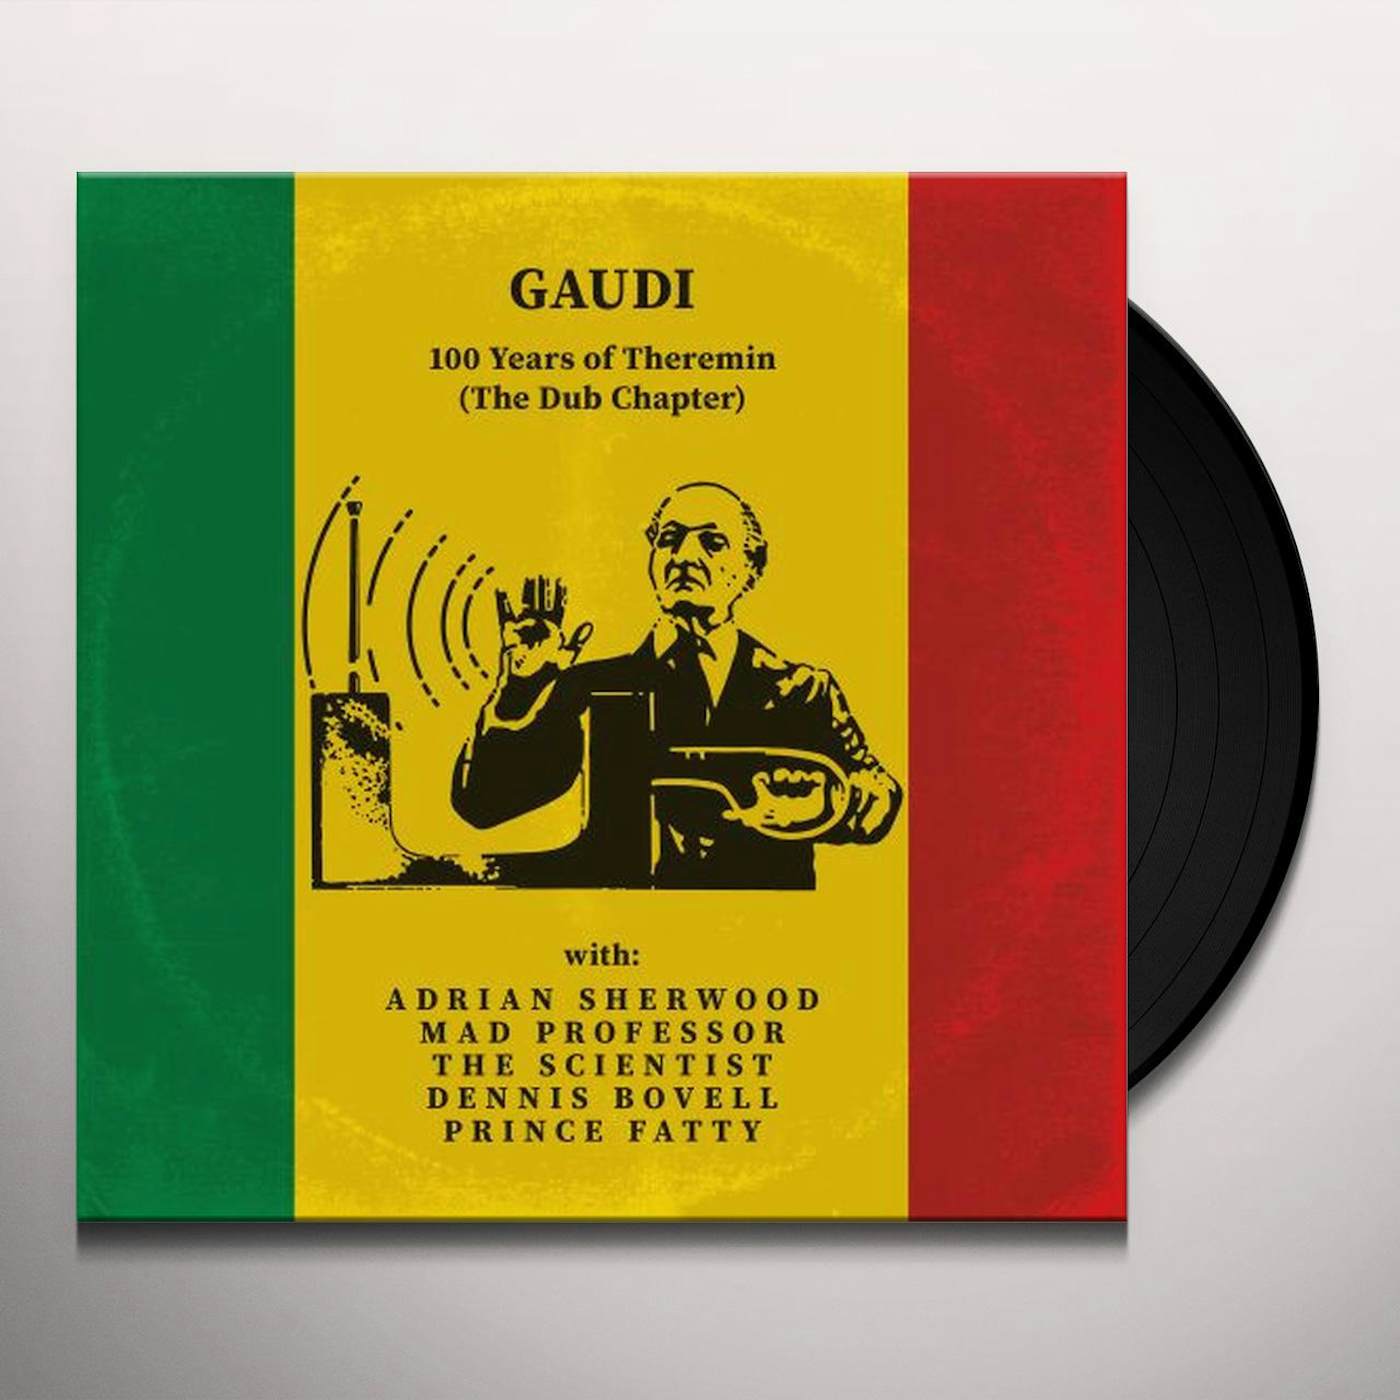 Gaudi 100 Years of Theremin (The Dub Chapter) Vinyl Record